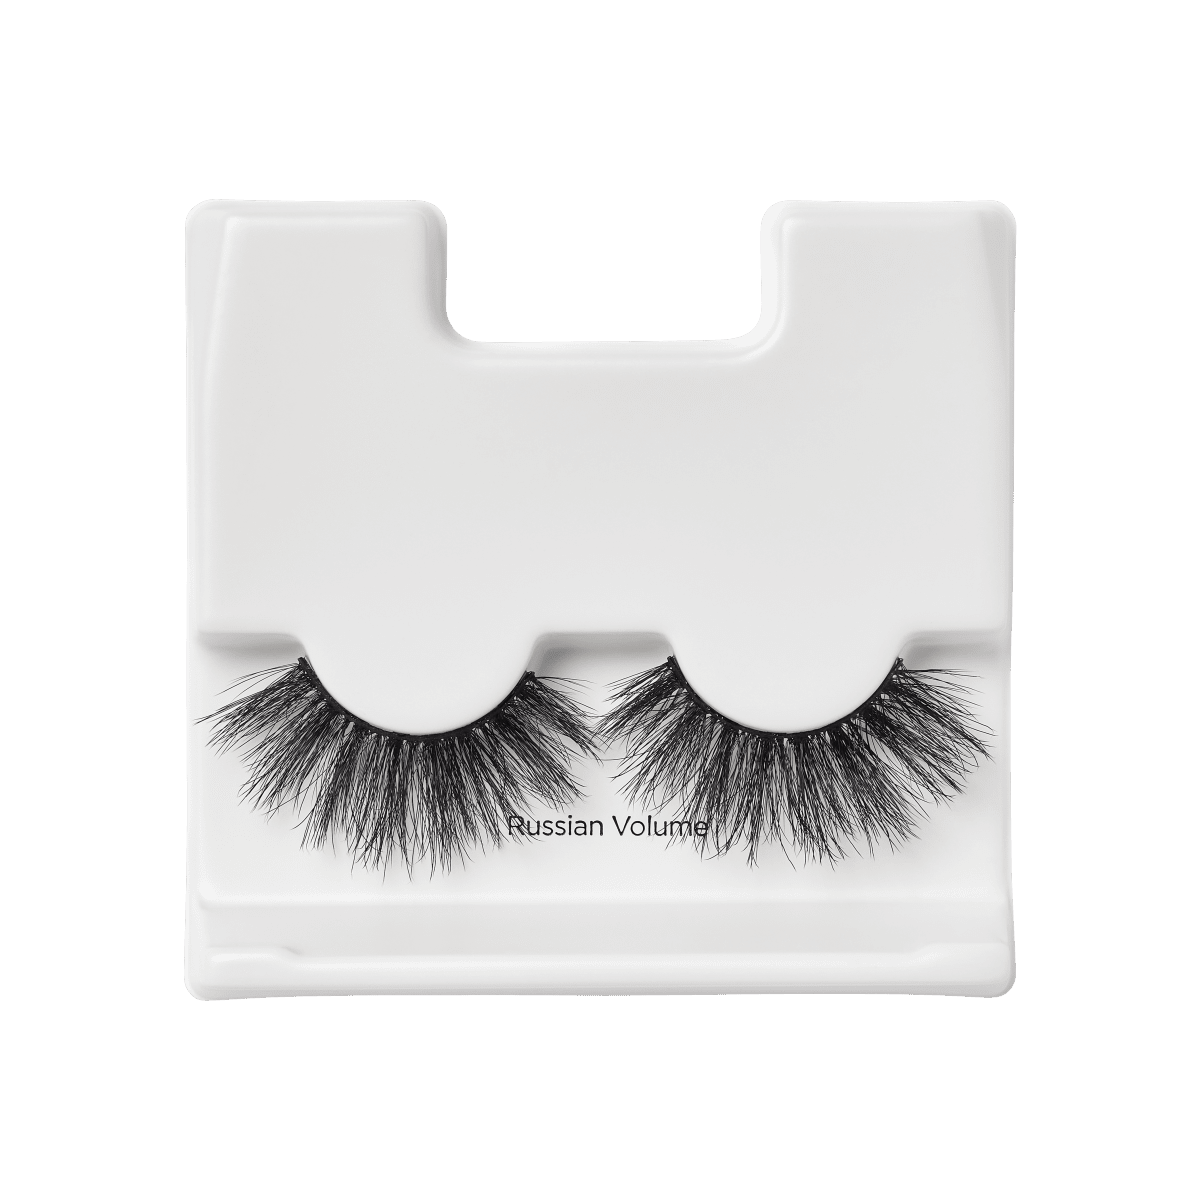 KISS Lash Couture LuXtensions Valentines - Strip 01 Russian Volume